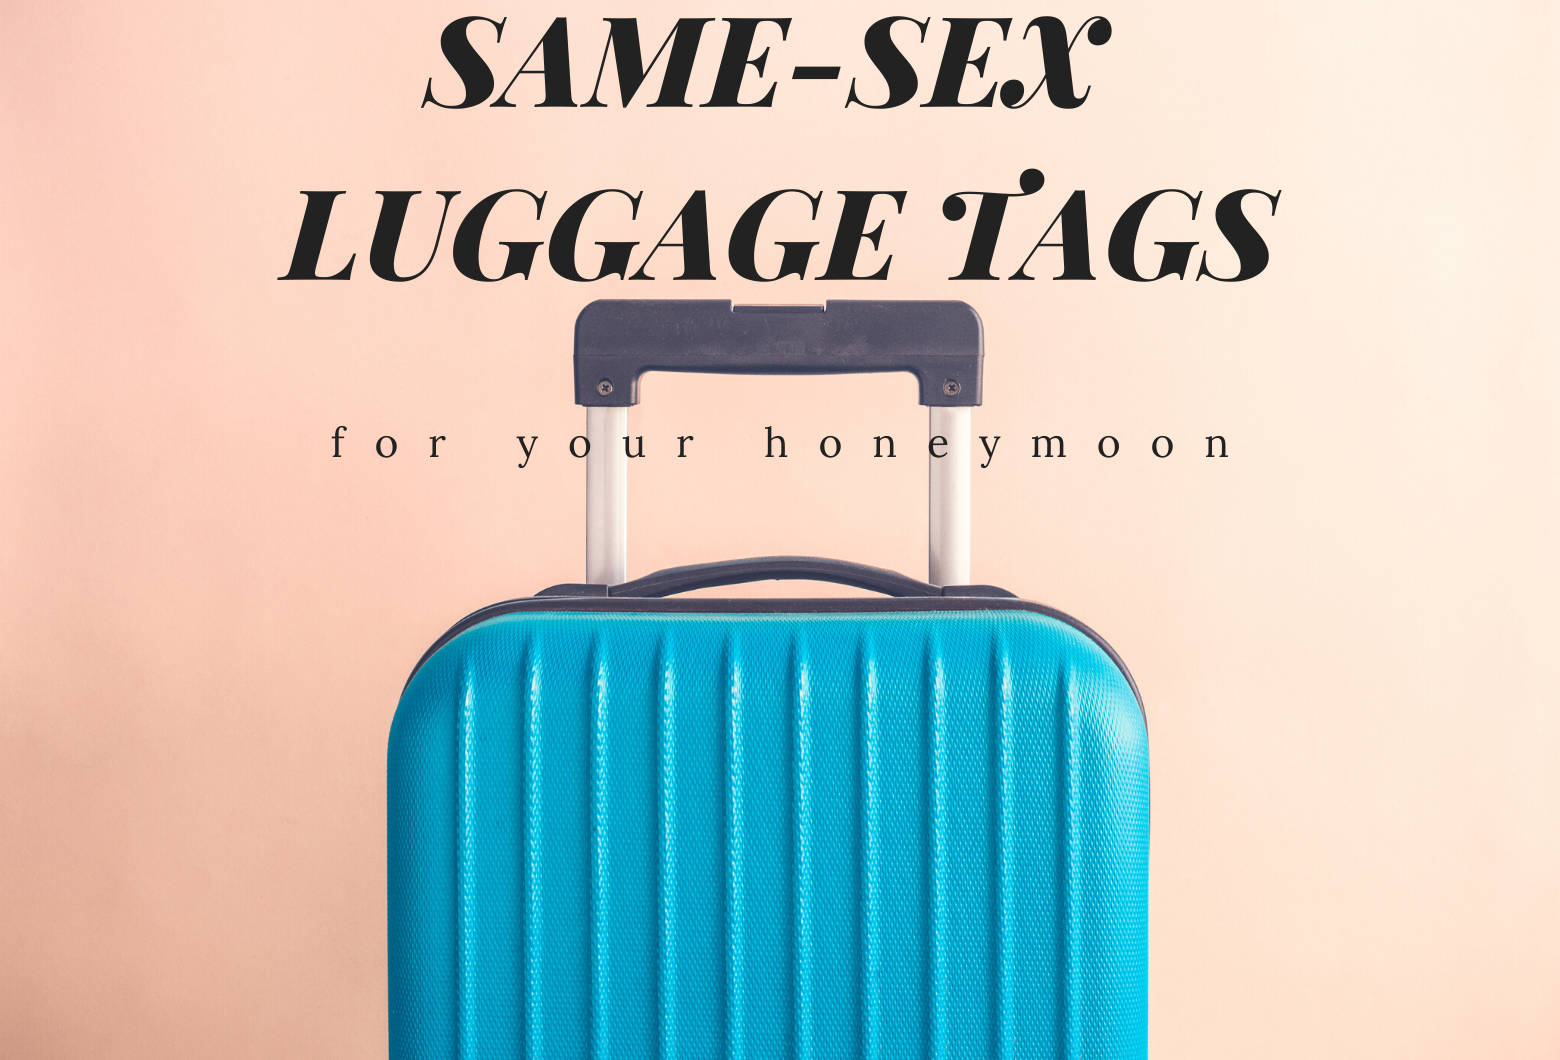 Same Sex Luggage Tags for Your Honeymoon